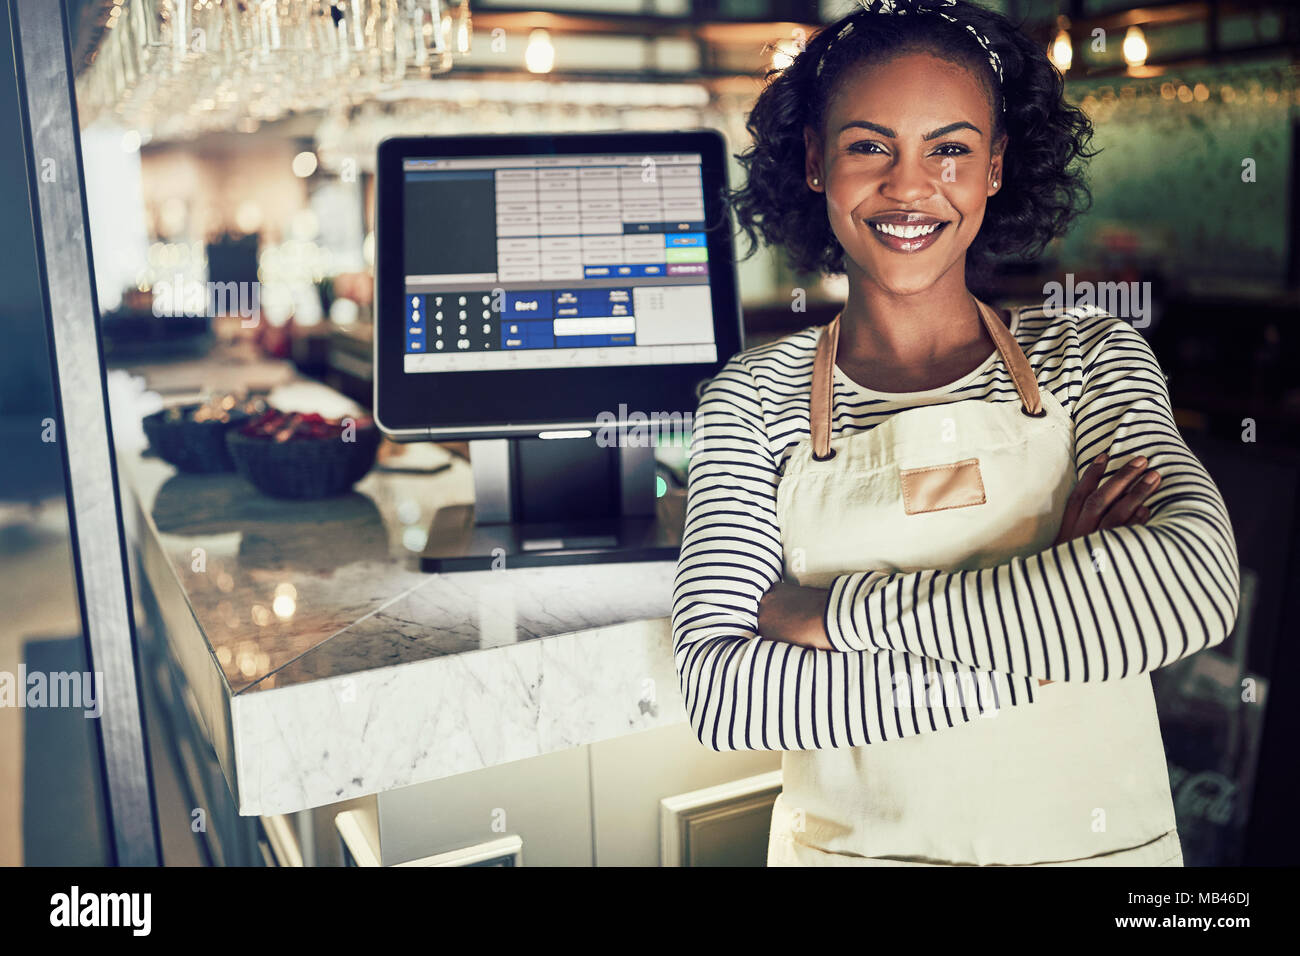 Young African waitress wearing an apron and smiling while standing by a point of sale terminal in a restaurant Stock Photo